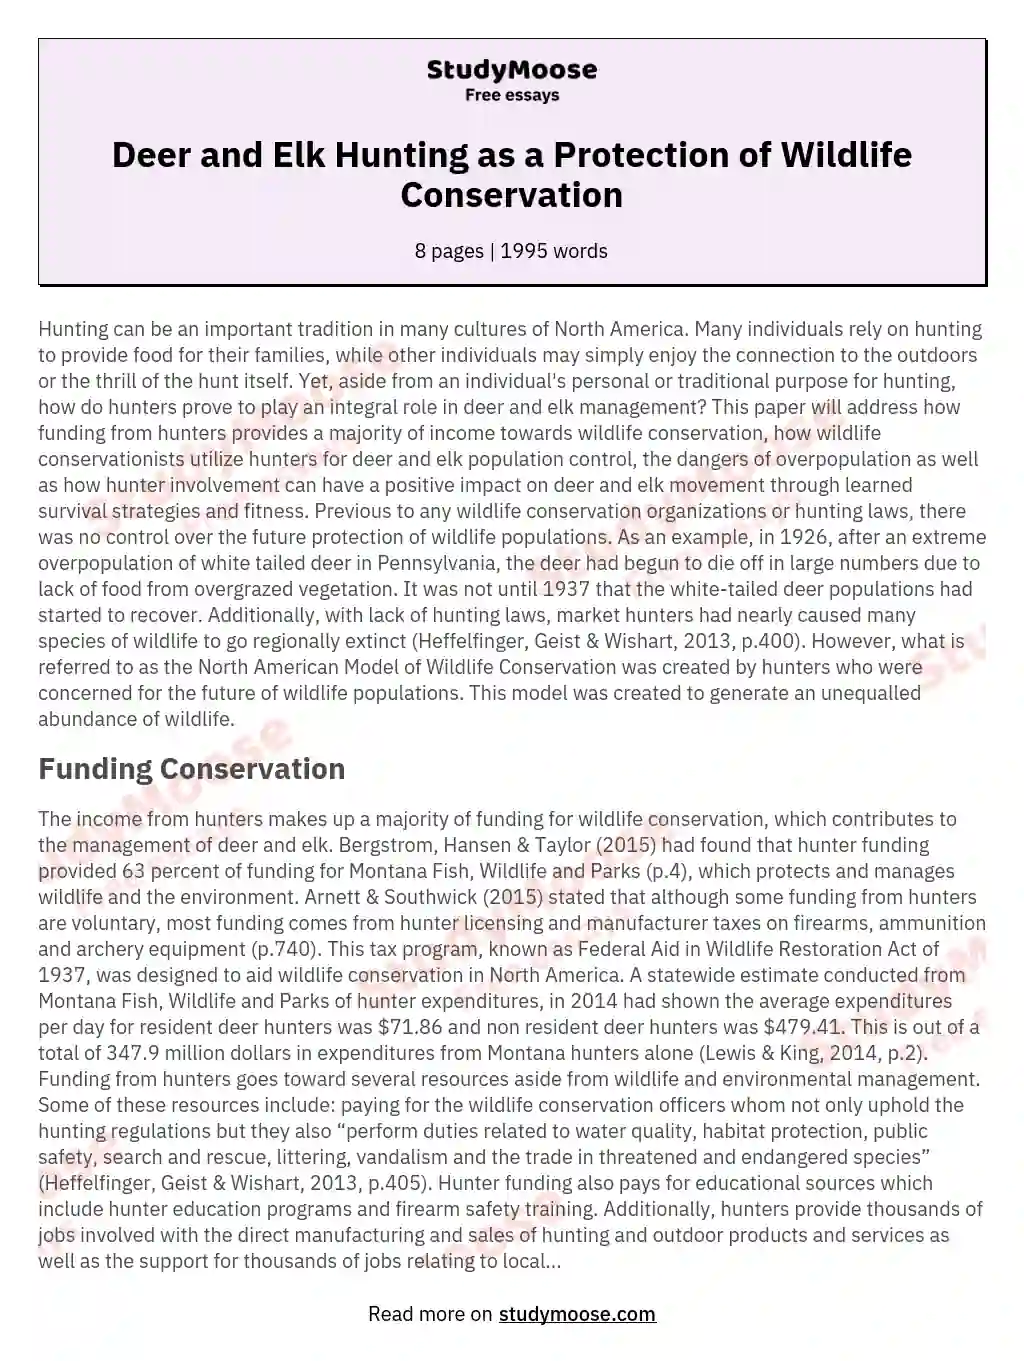 Deer and Elk Hunting as a Protection of Wildlife Conservation essay